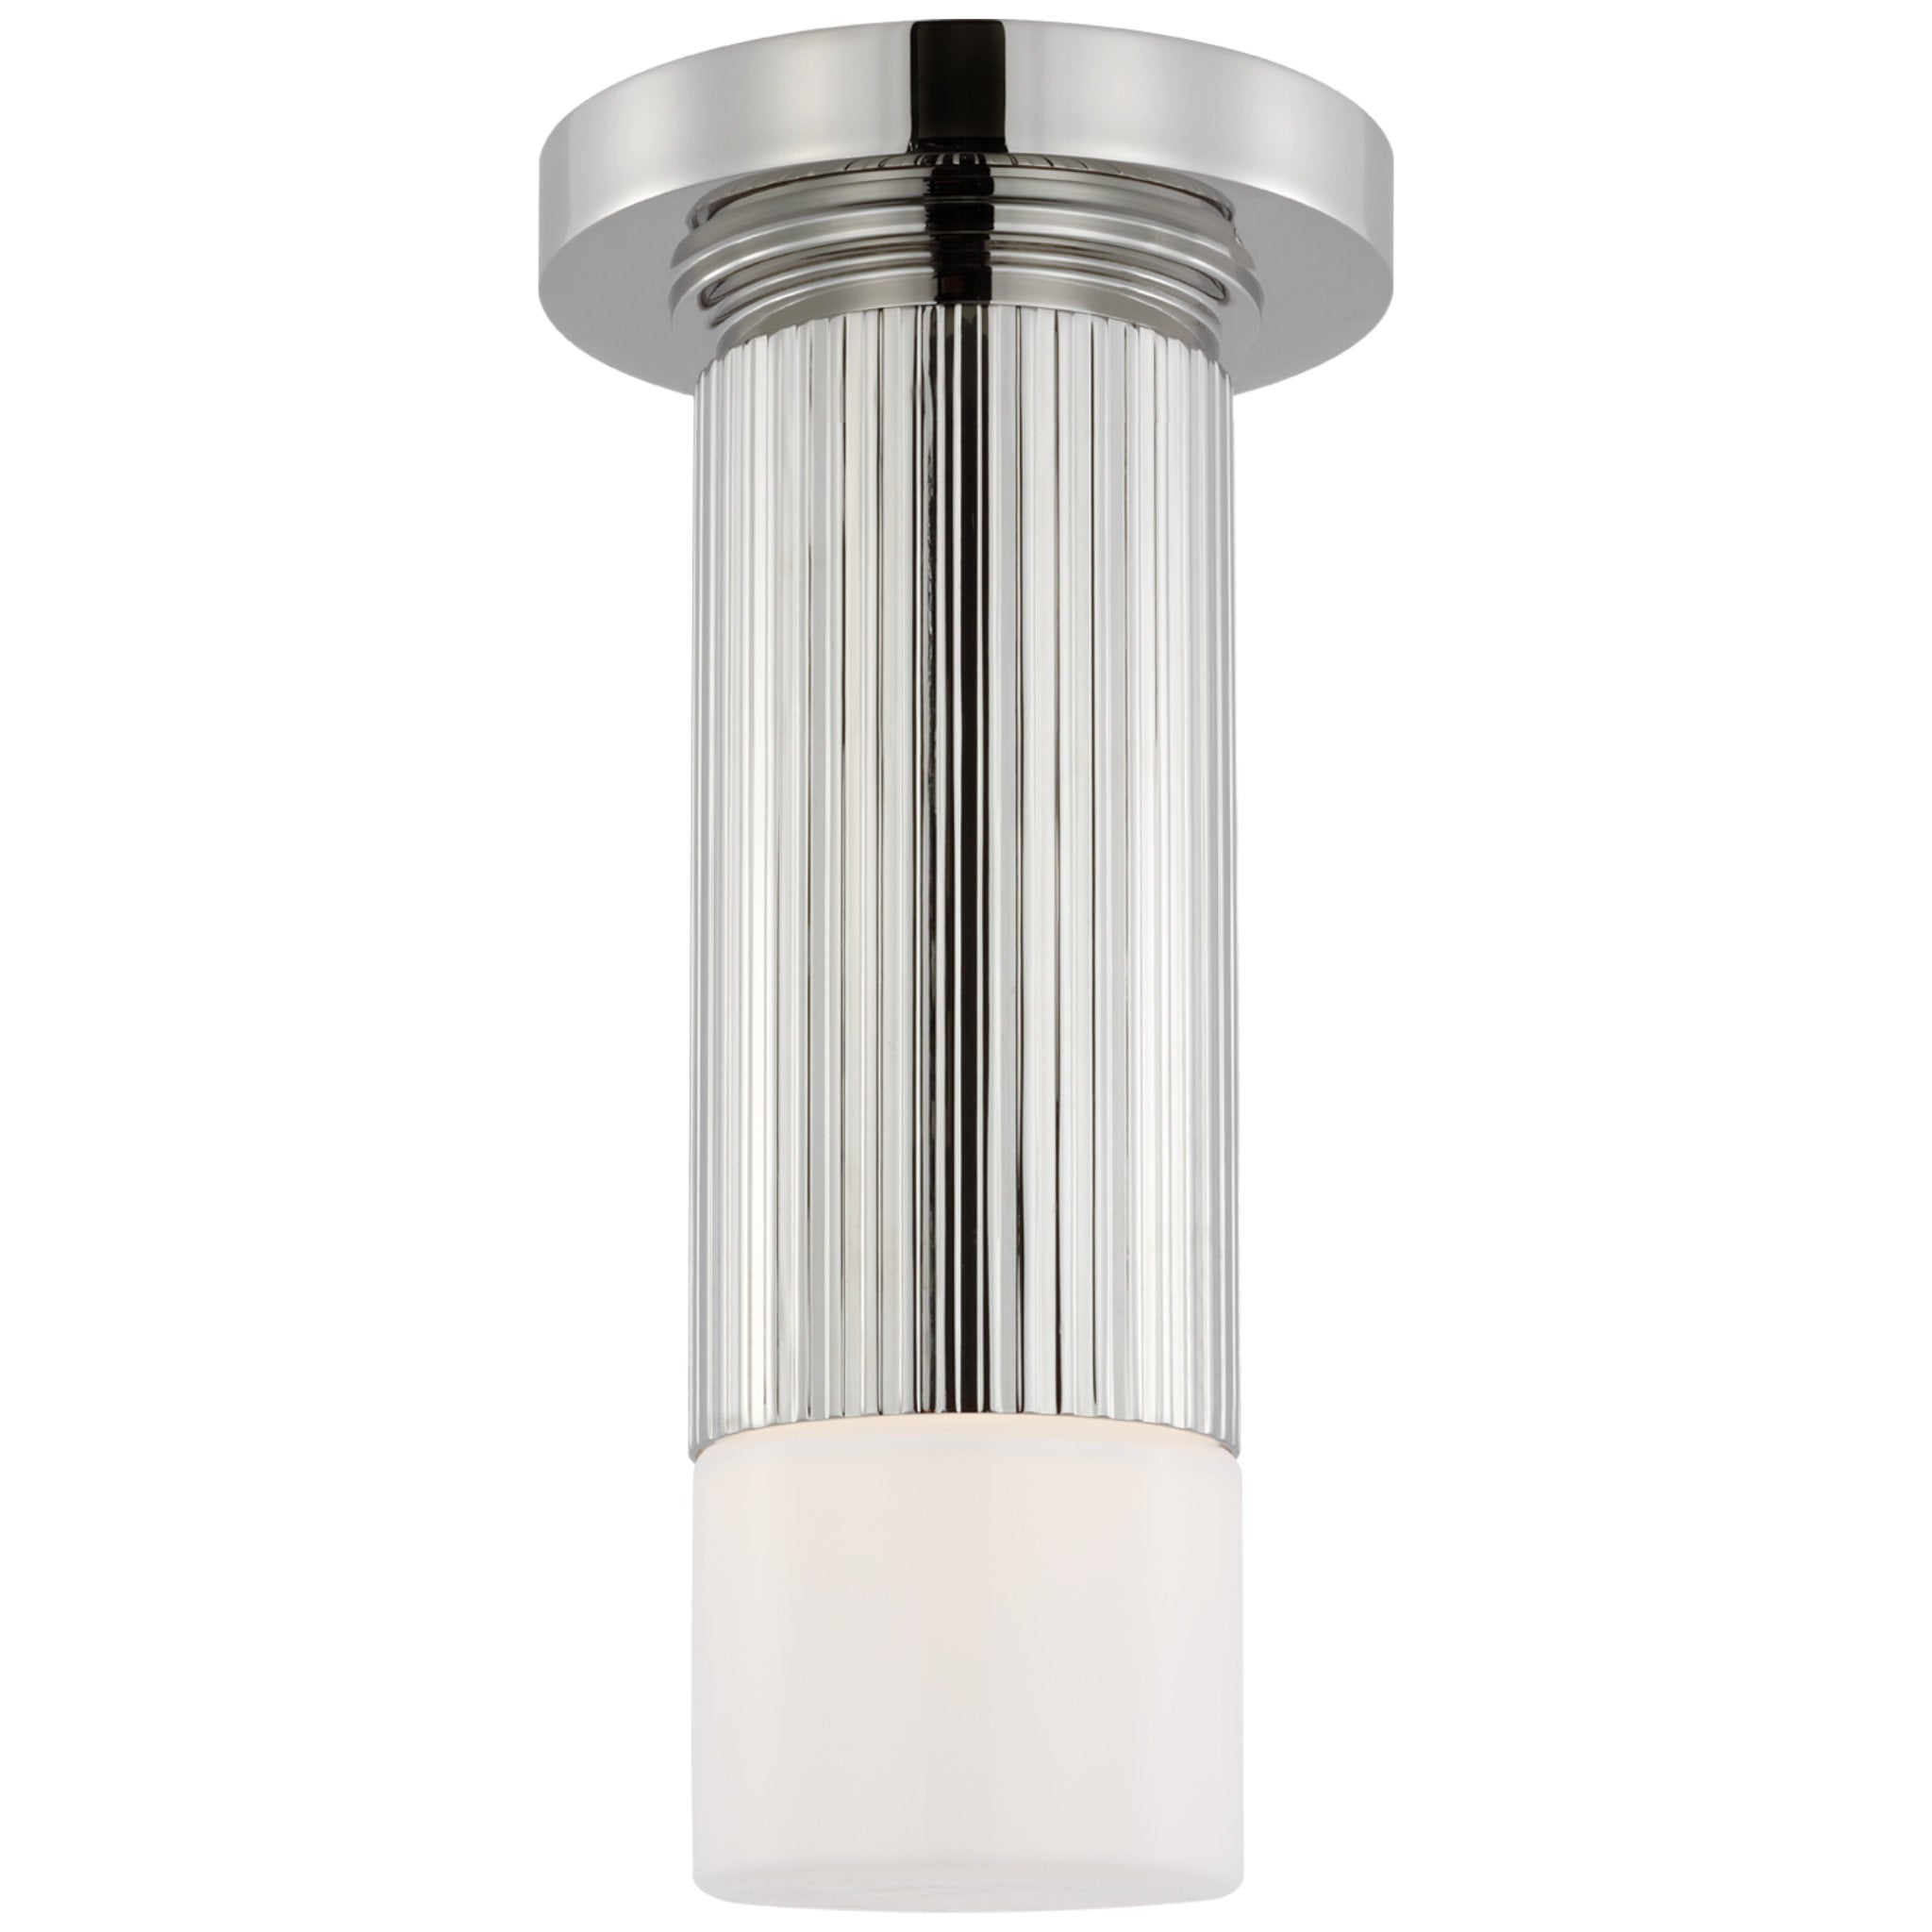 Thomas O'Brien Ace Mini Monopoint Flush Mount in Polished Nickel with White Glass